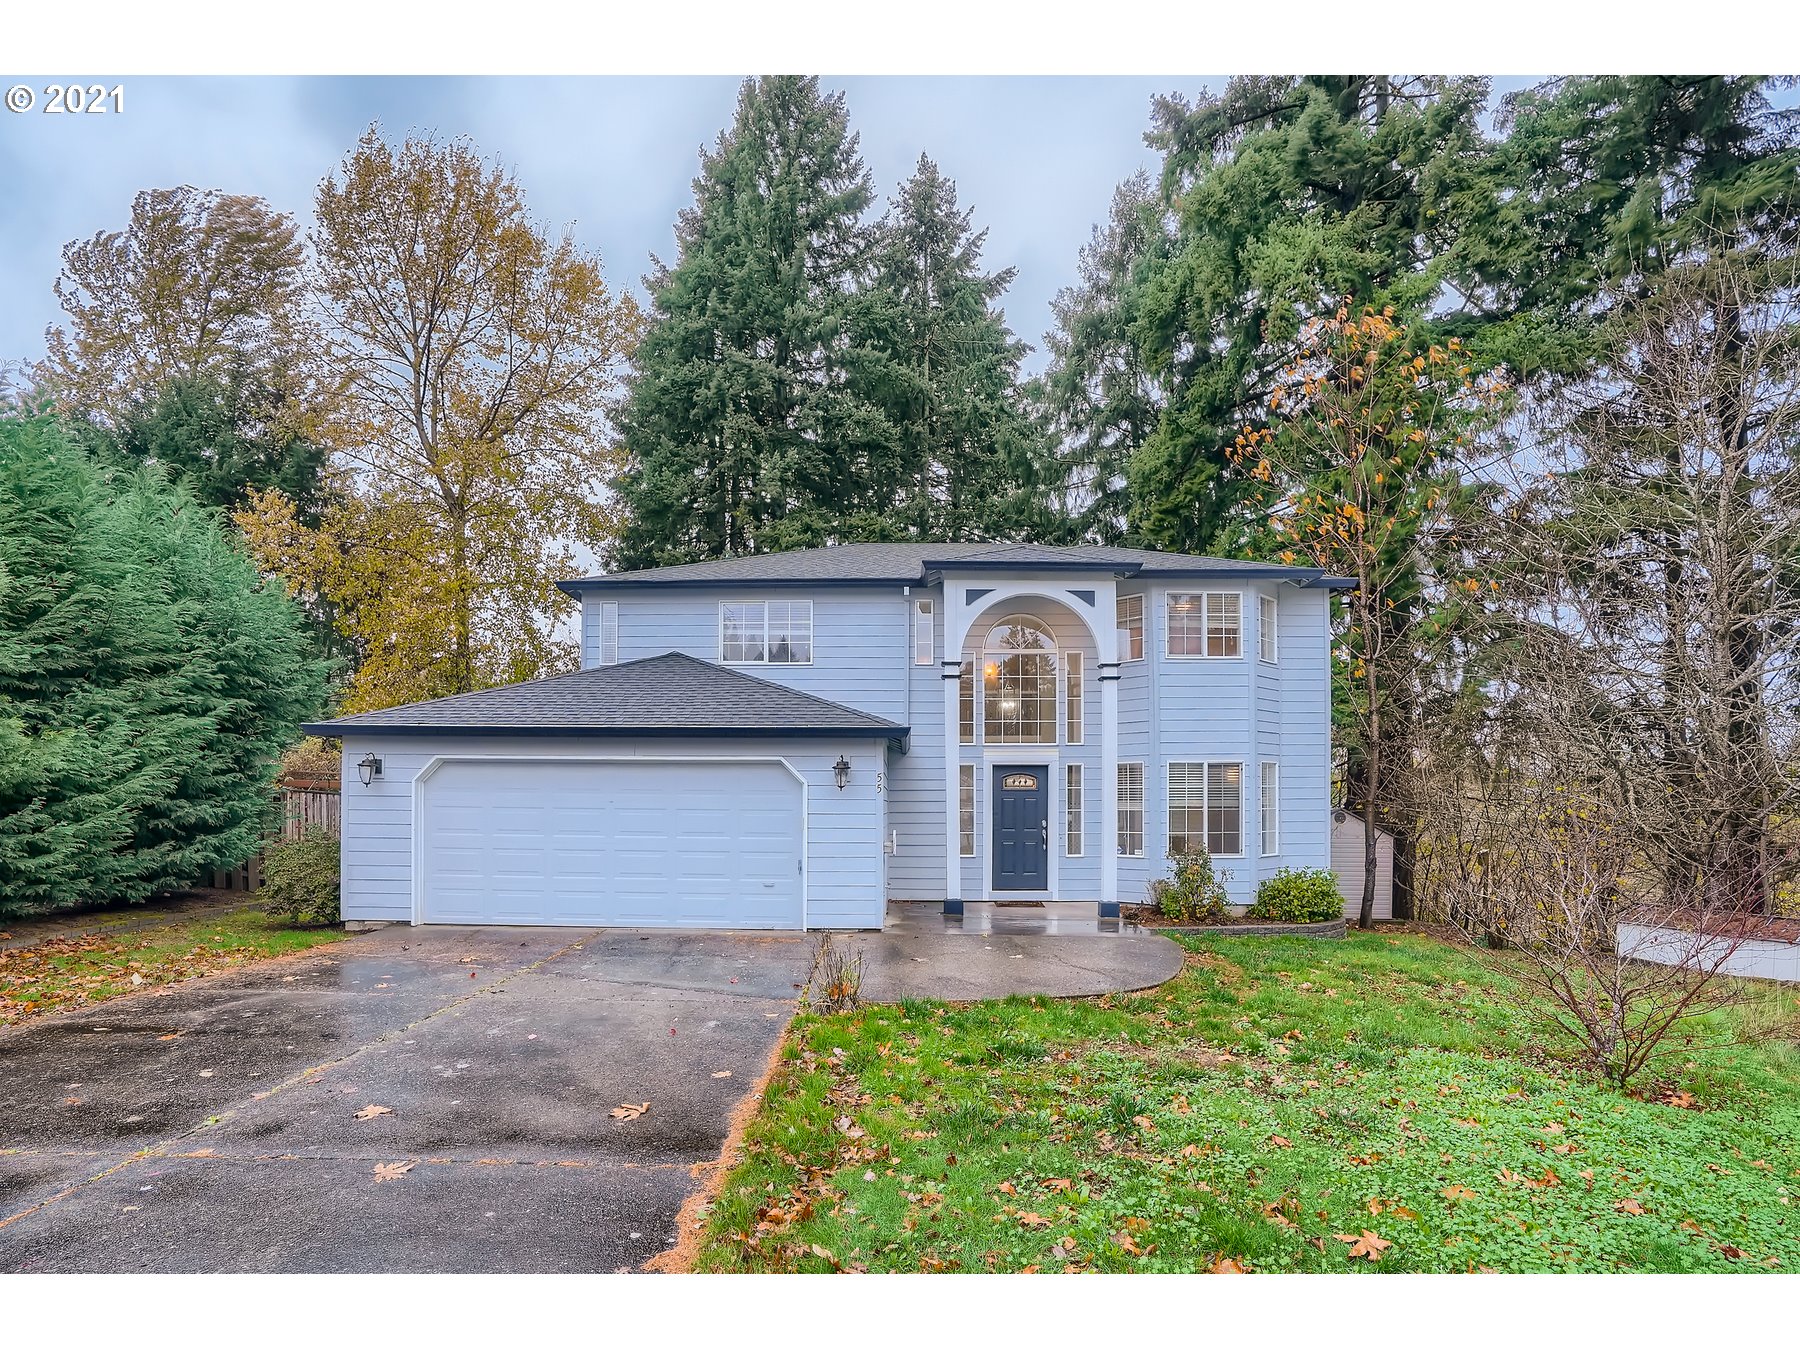 55 SW 212TH AVE (1 of 32)